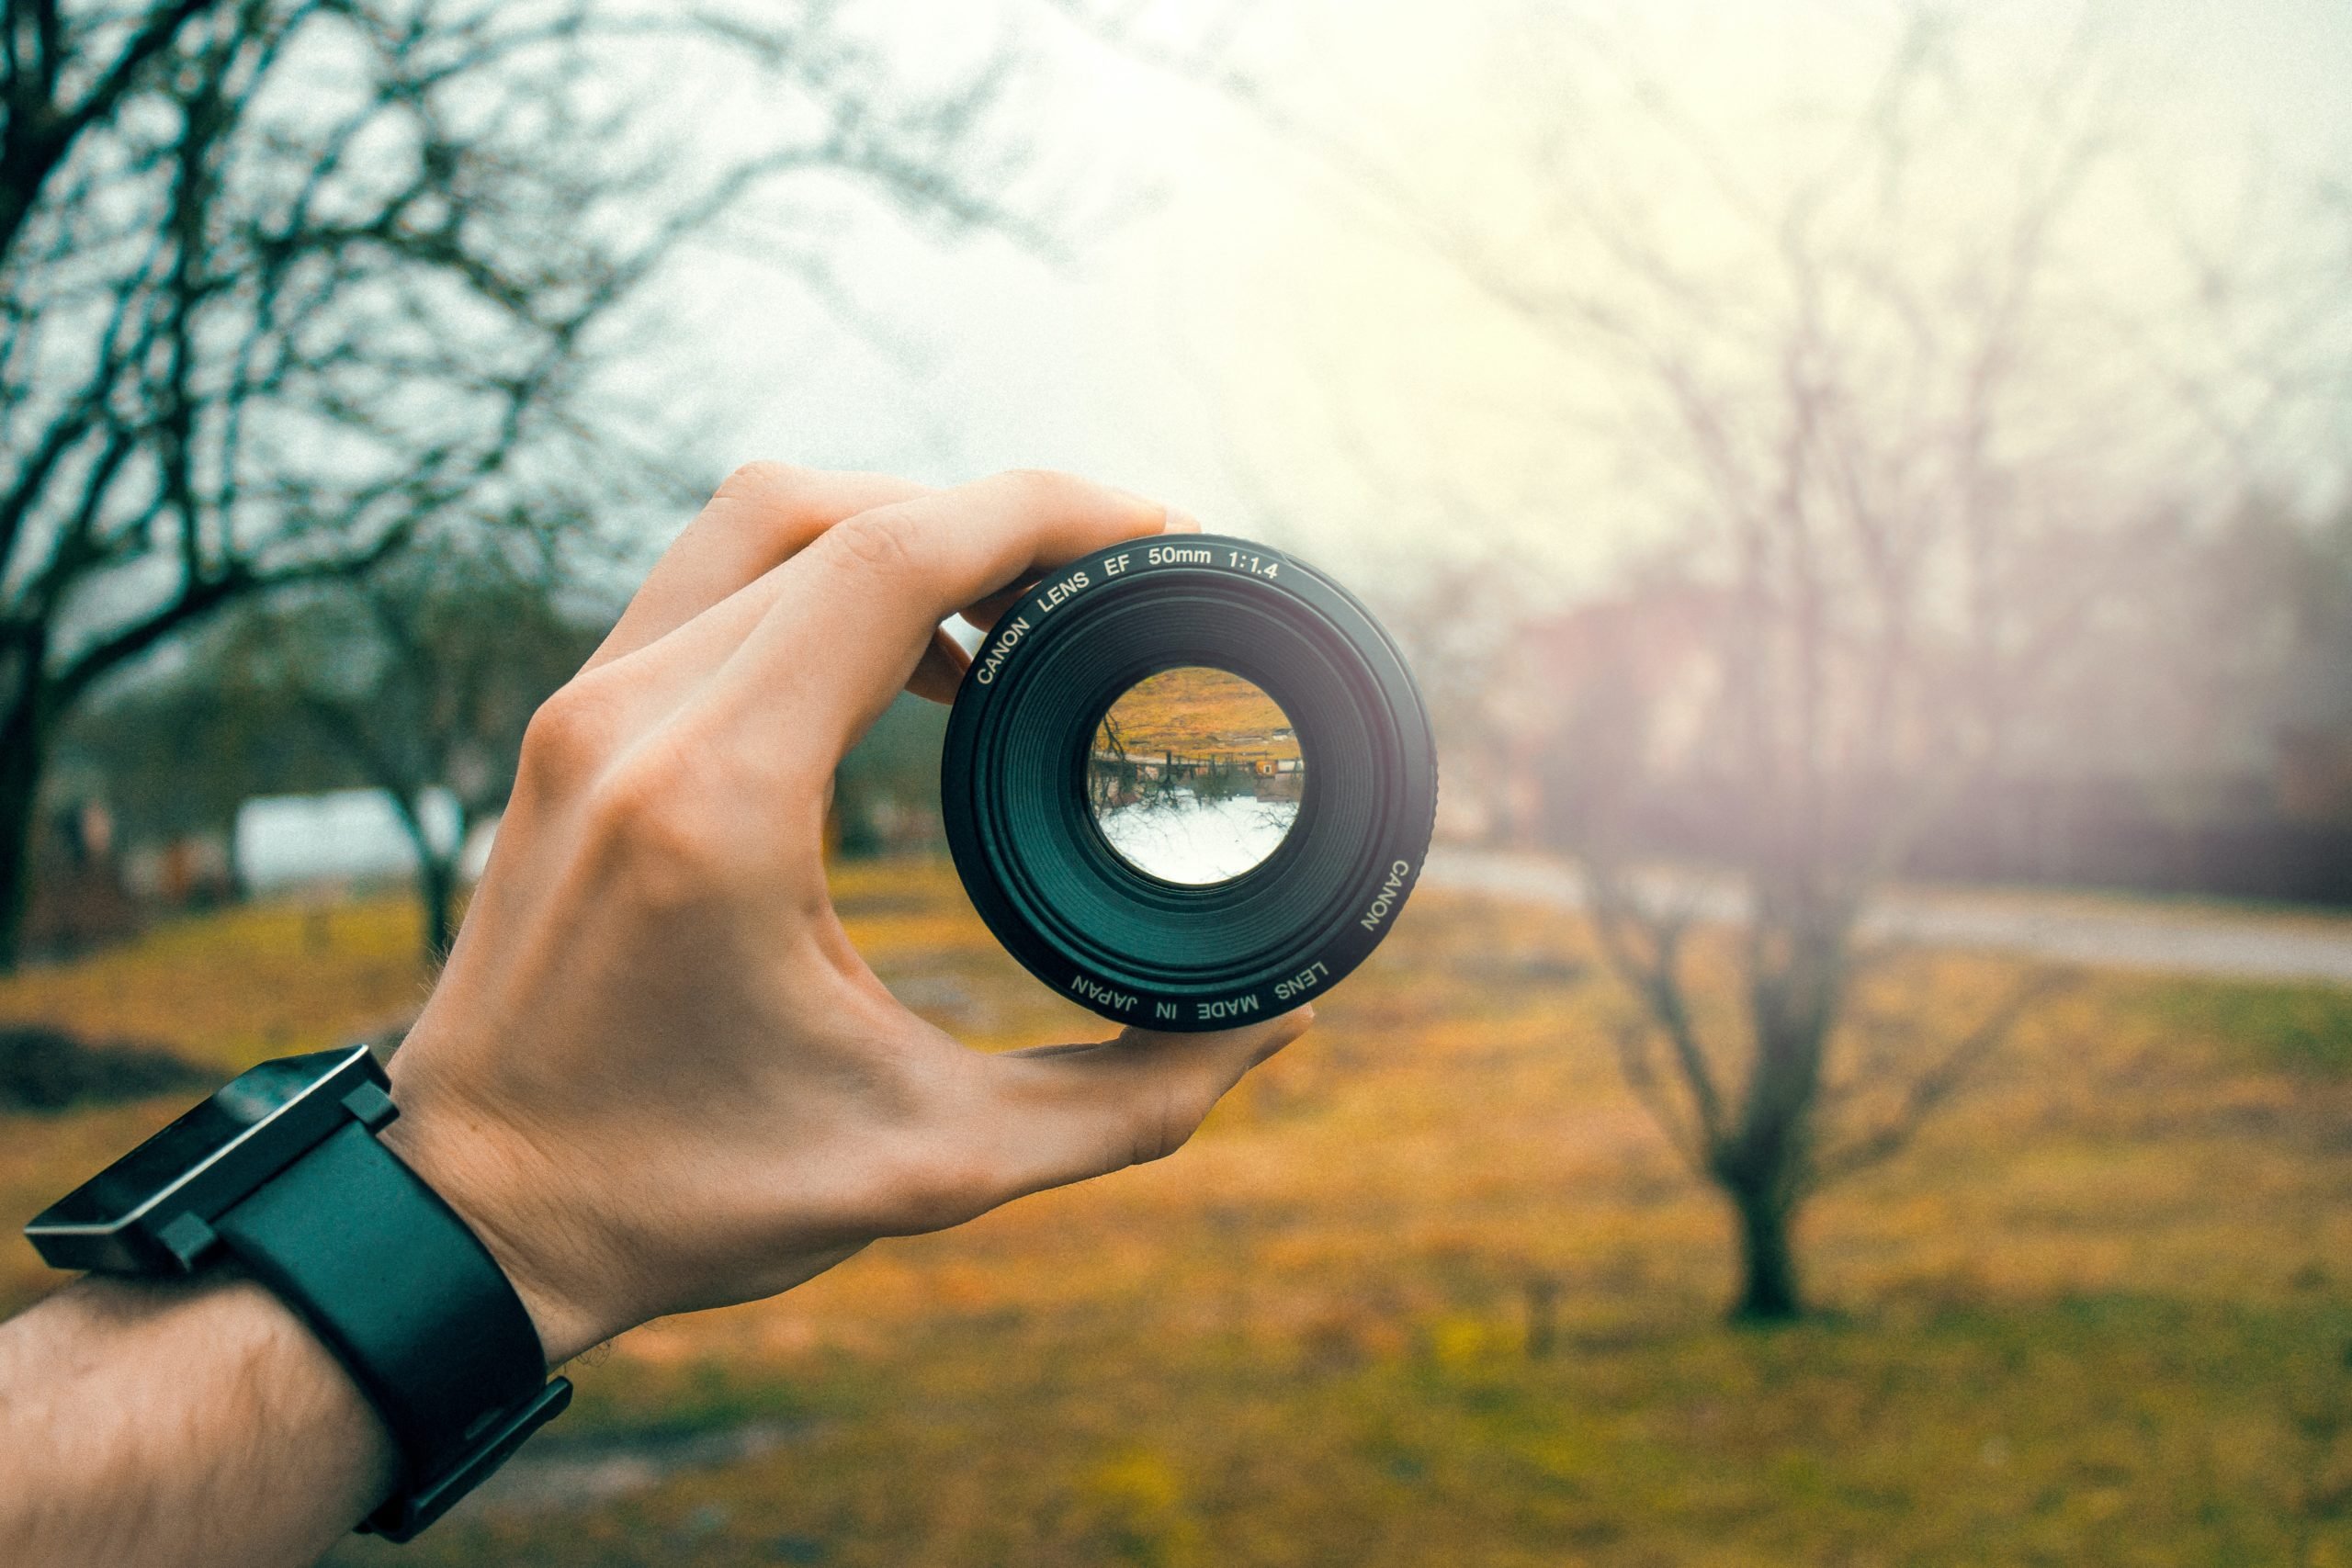 person holding a camera lens in the centre of a rural grassy shot